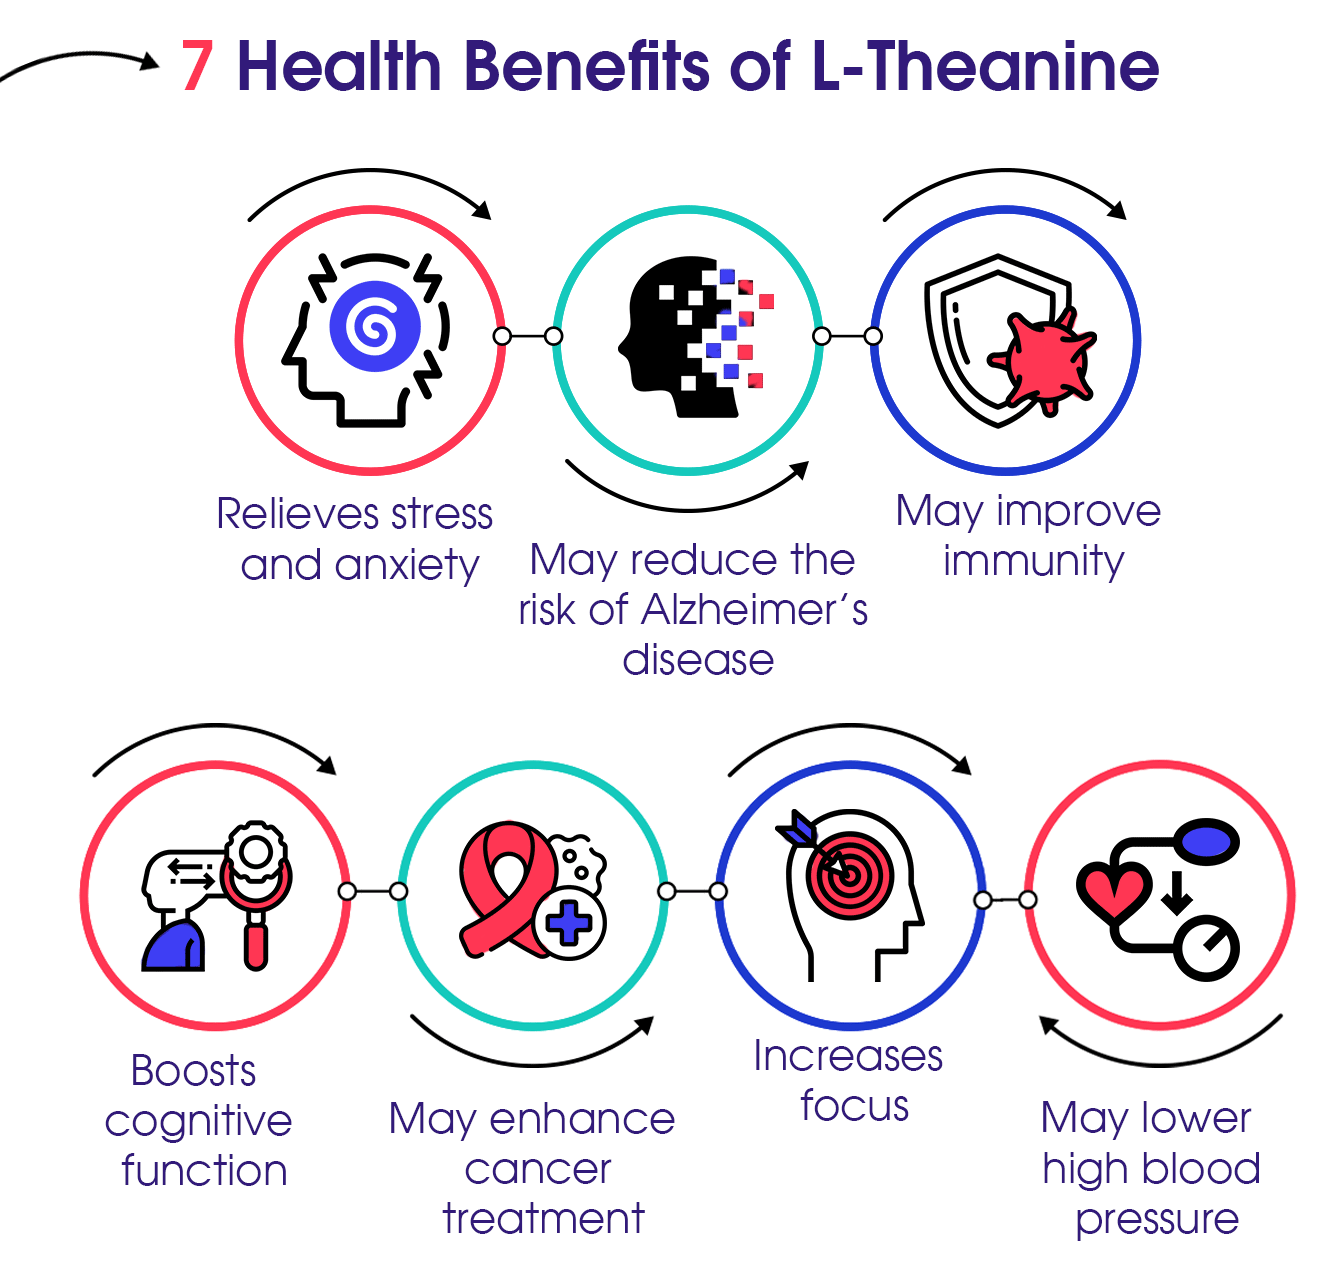 l-theanine weight loss and memory boost